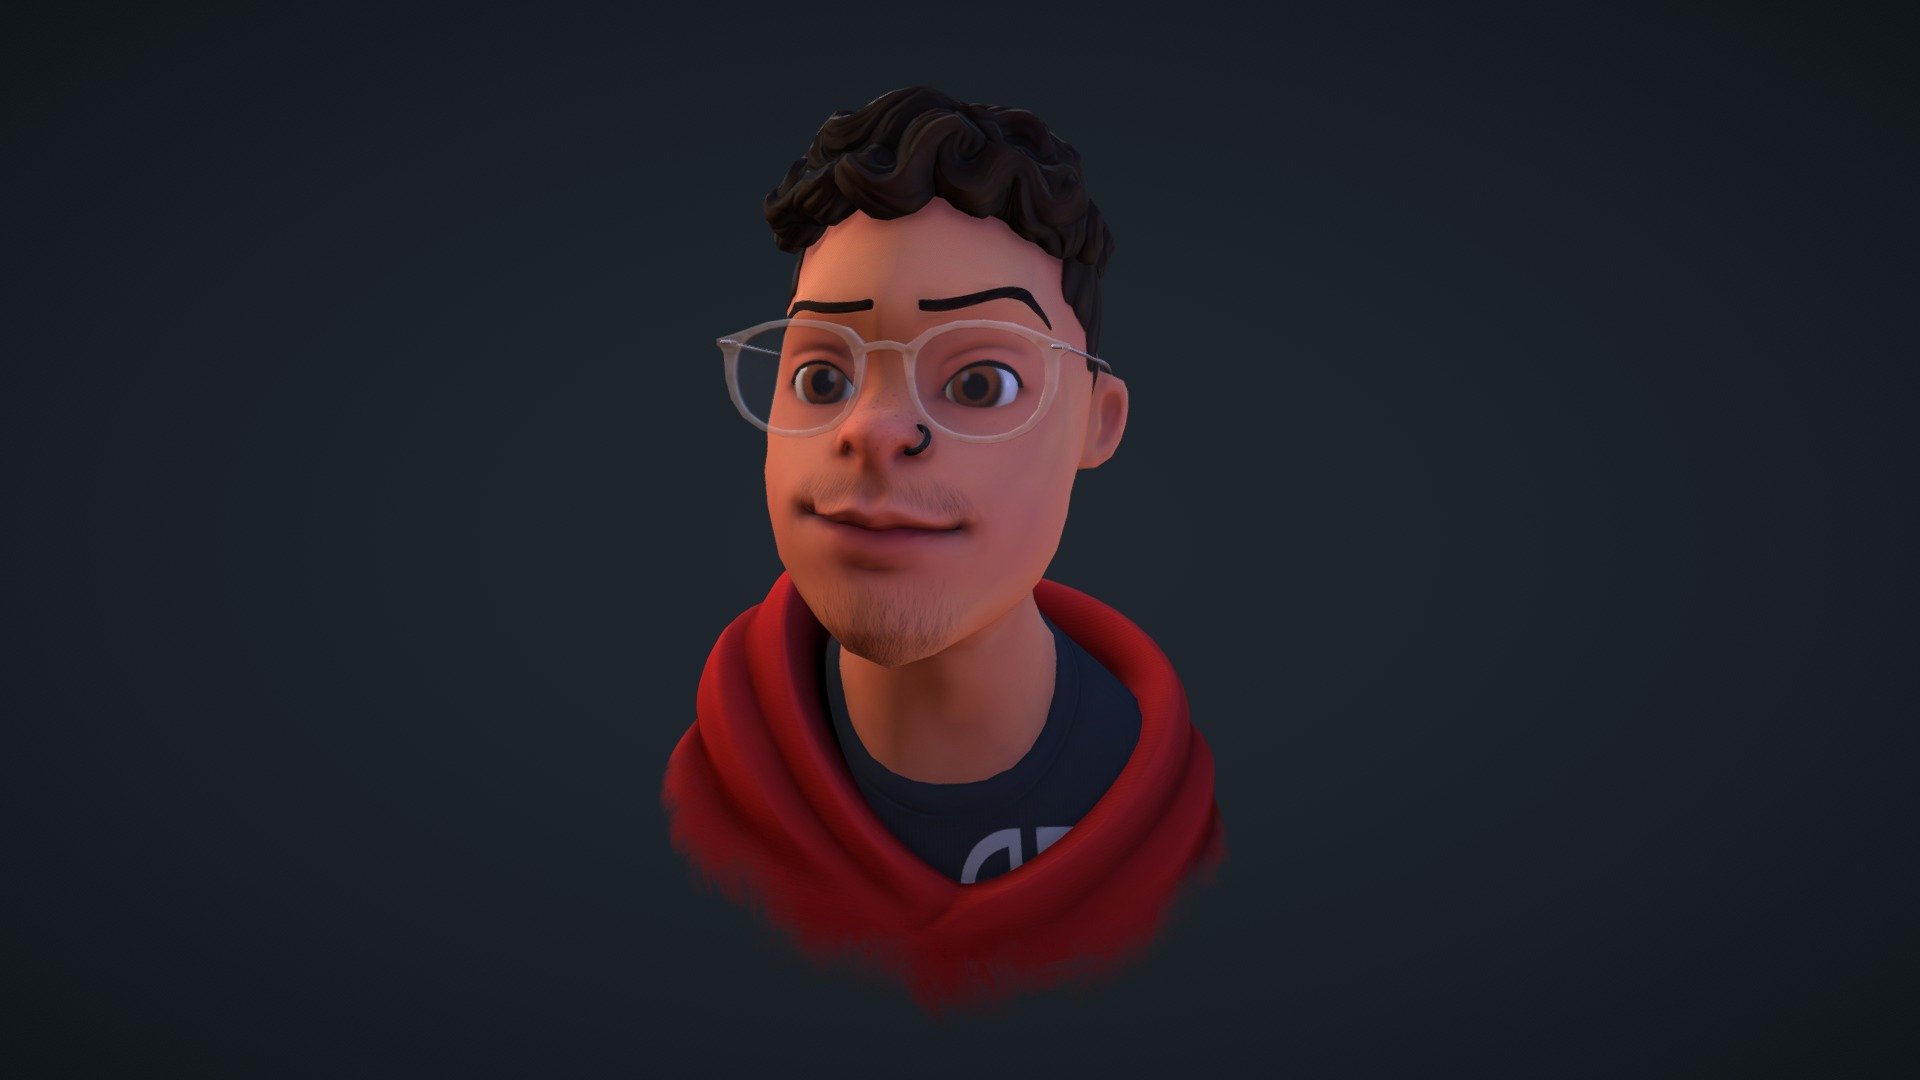 This is my take on a stylized version of myself! Sculpting was done in zBrush and texturing in Substance Painter. 

I hope you like it! :) - Stylized Self-Portrait - 3D model by MarleyBlom3D 3d model